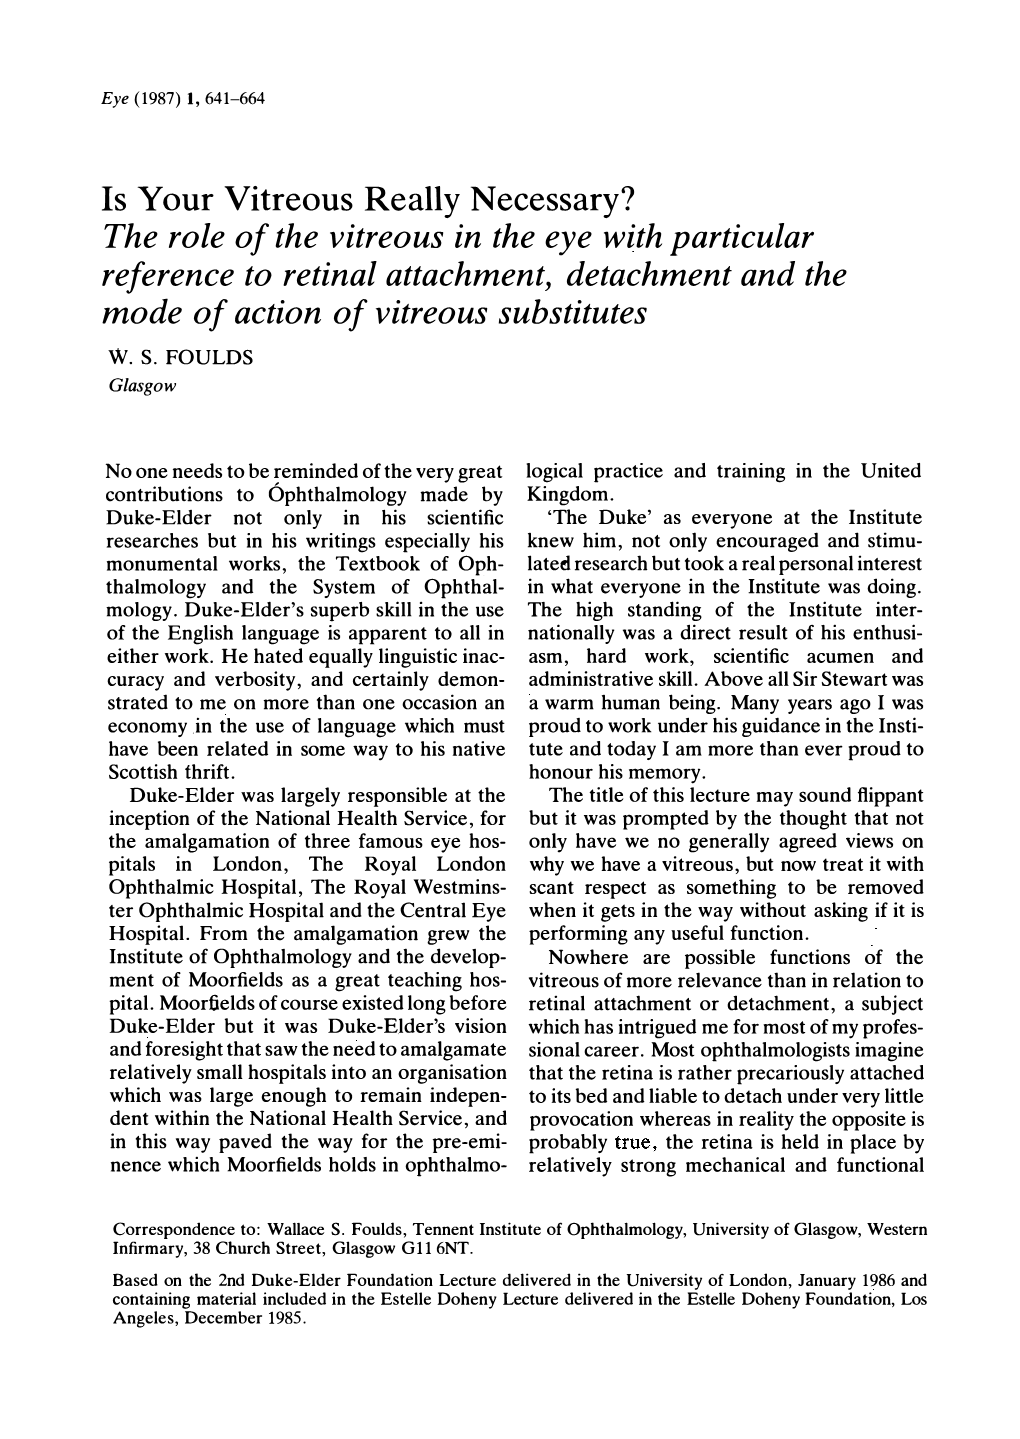 The Role of the Vitreous in the Eye with Particular Reference to Retinal Attachment, Detachment and the Mode of Action of Vitreous Substitutes